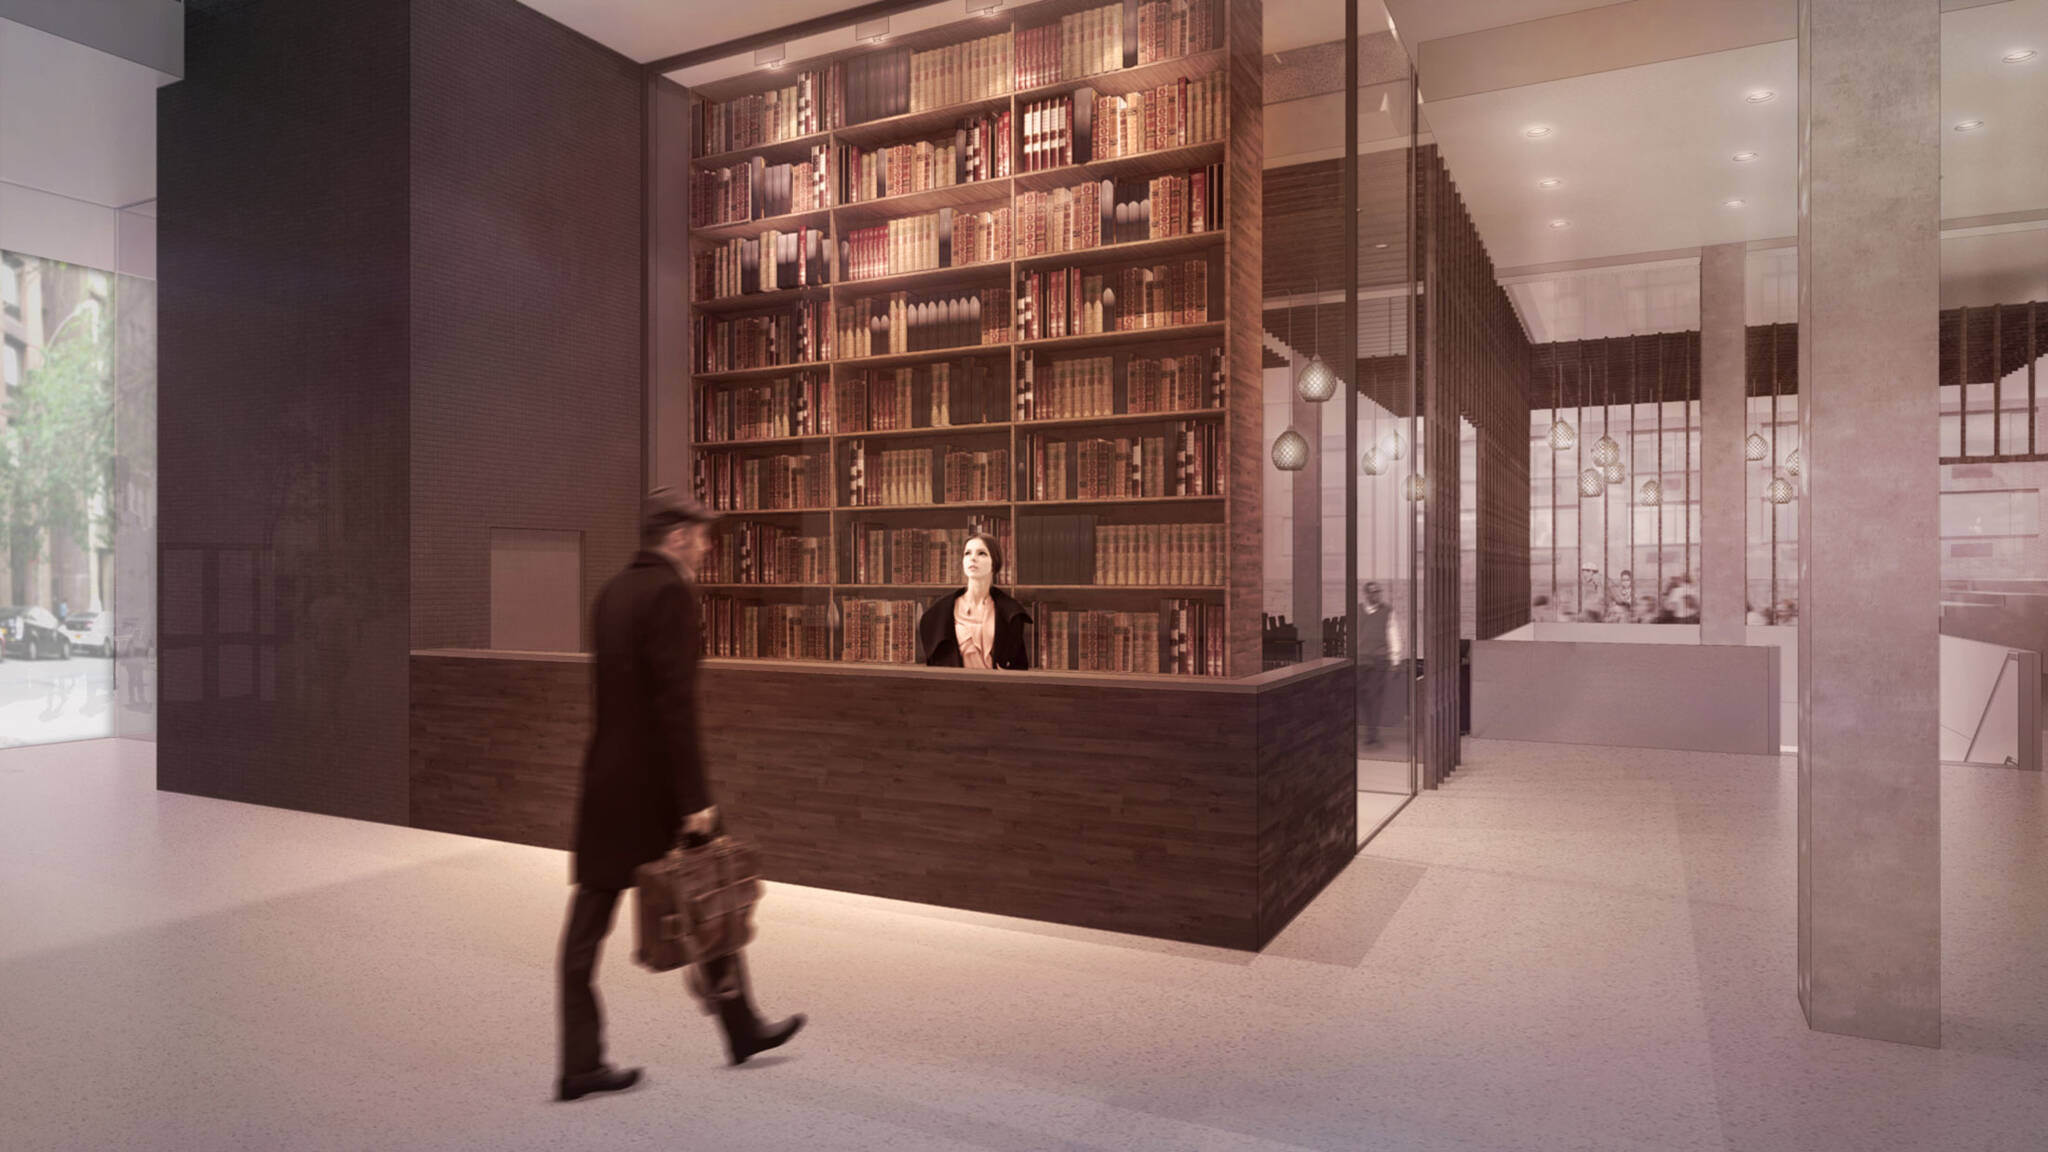 Front desk of the American Bible Society project located at the Upper West Side, New York City designed by the architecture studio Danny Forster & Architecture